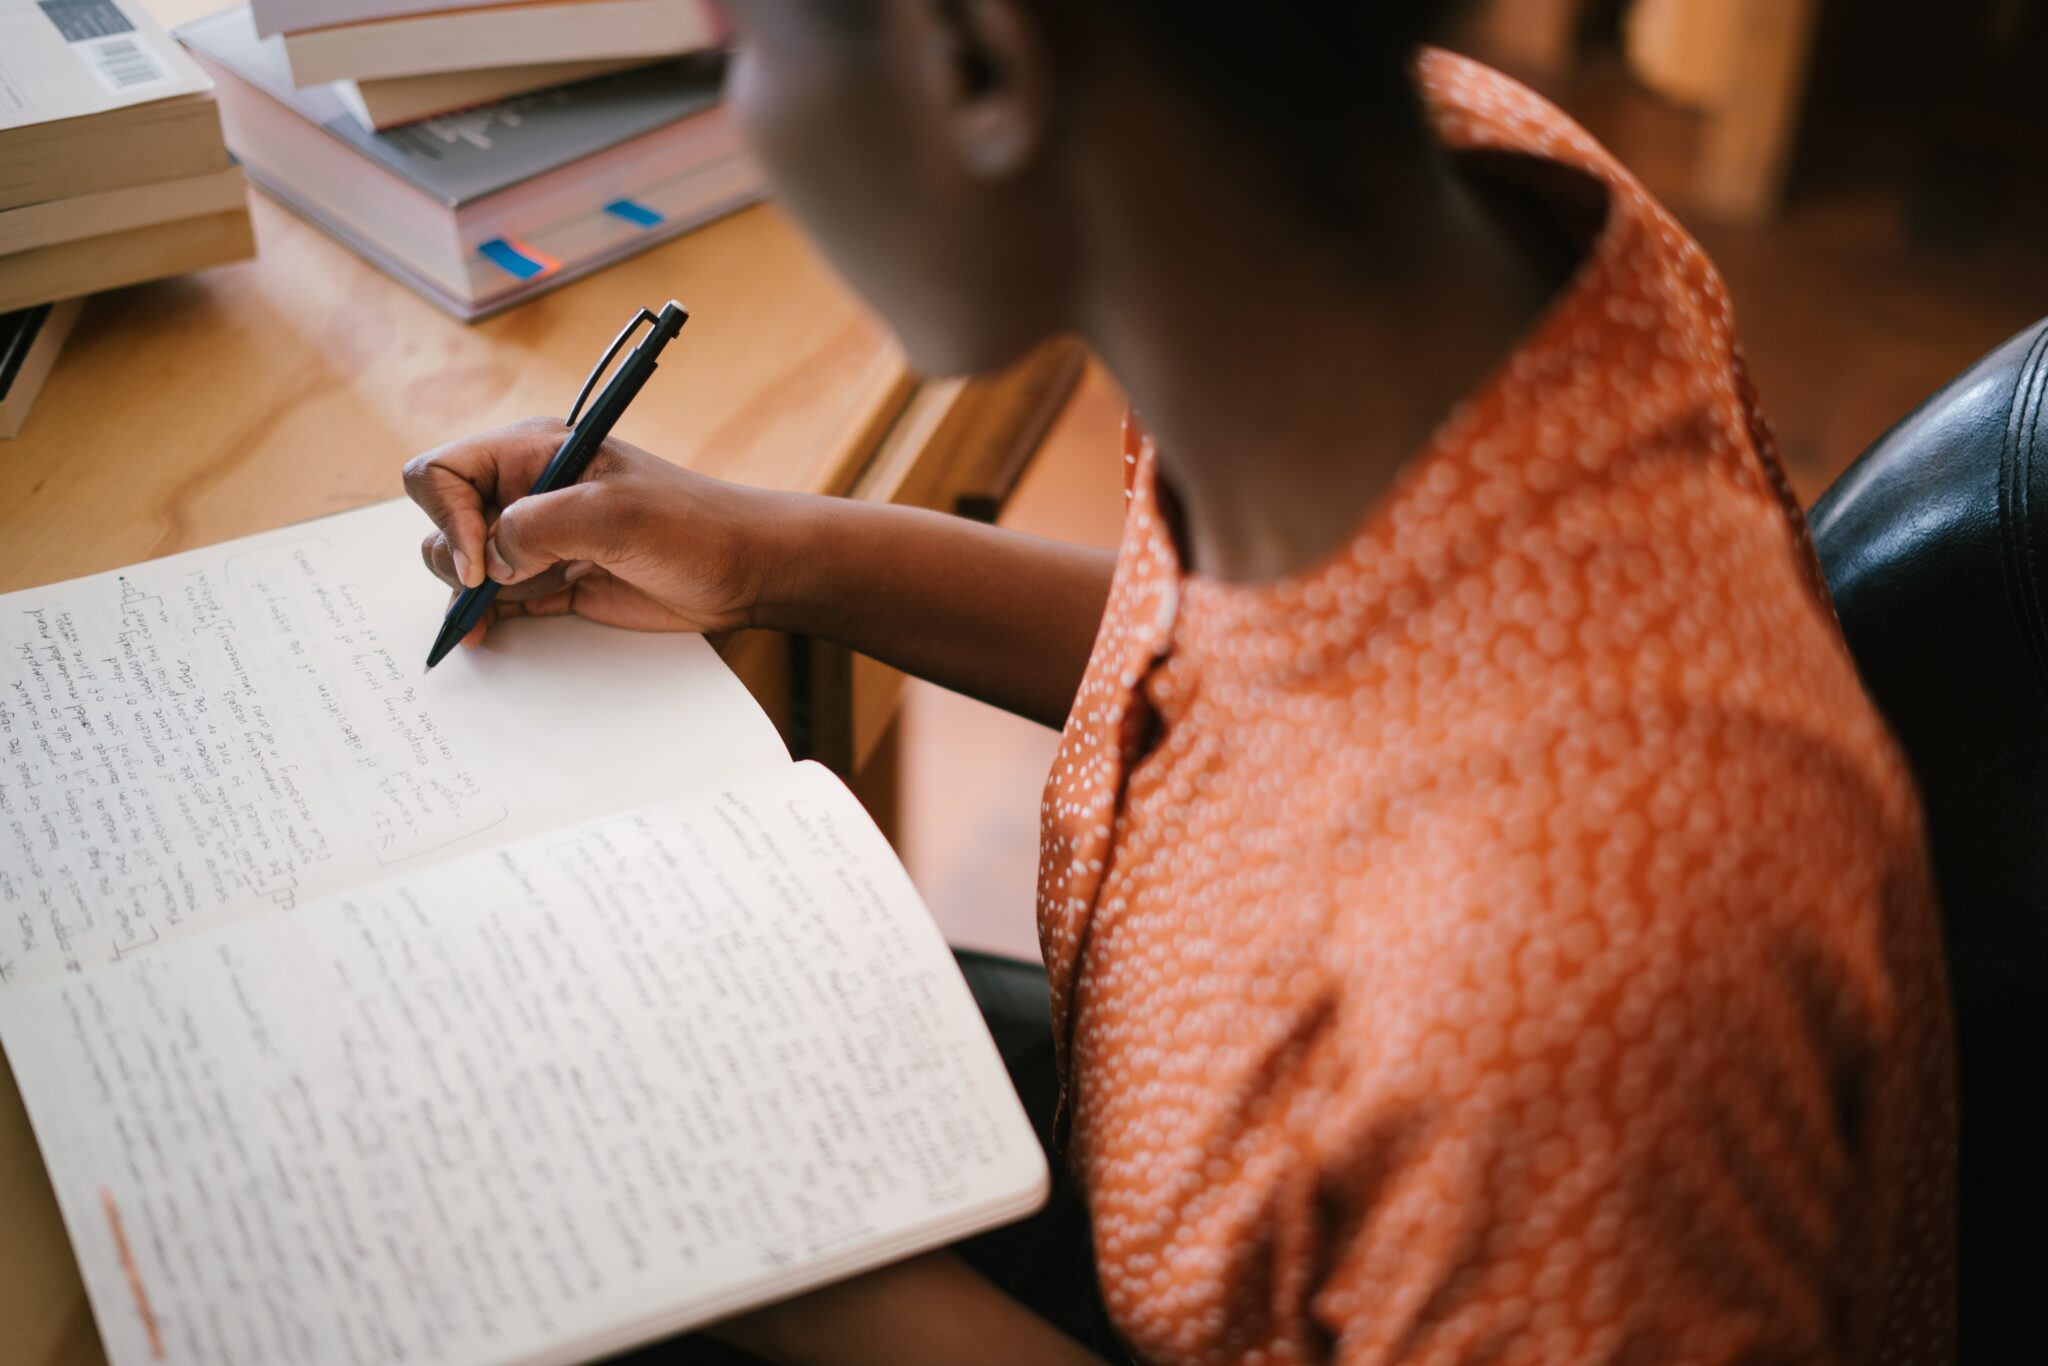 Transliteration takes characters from one alphabet and renders them into another.

Description: A woman wearing an orange blouse is writing in a notebook on her desk, surrounded by books.